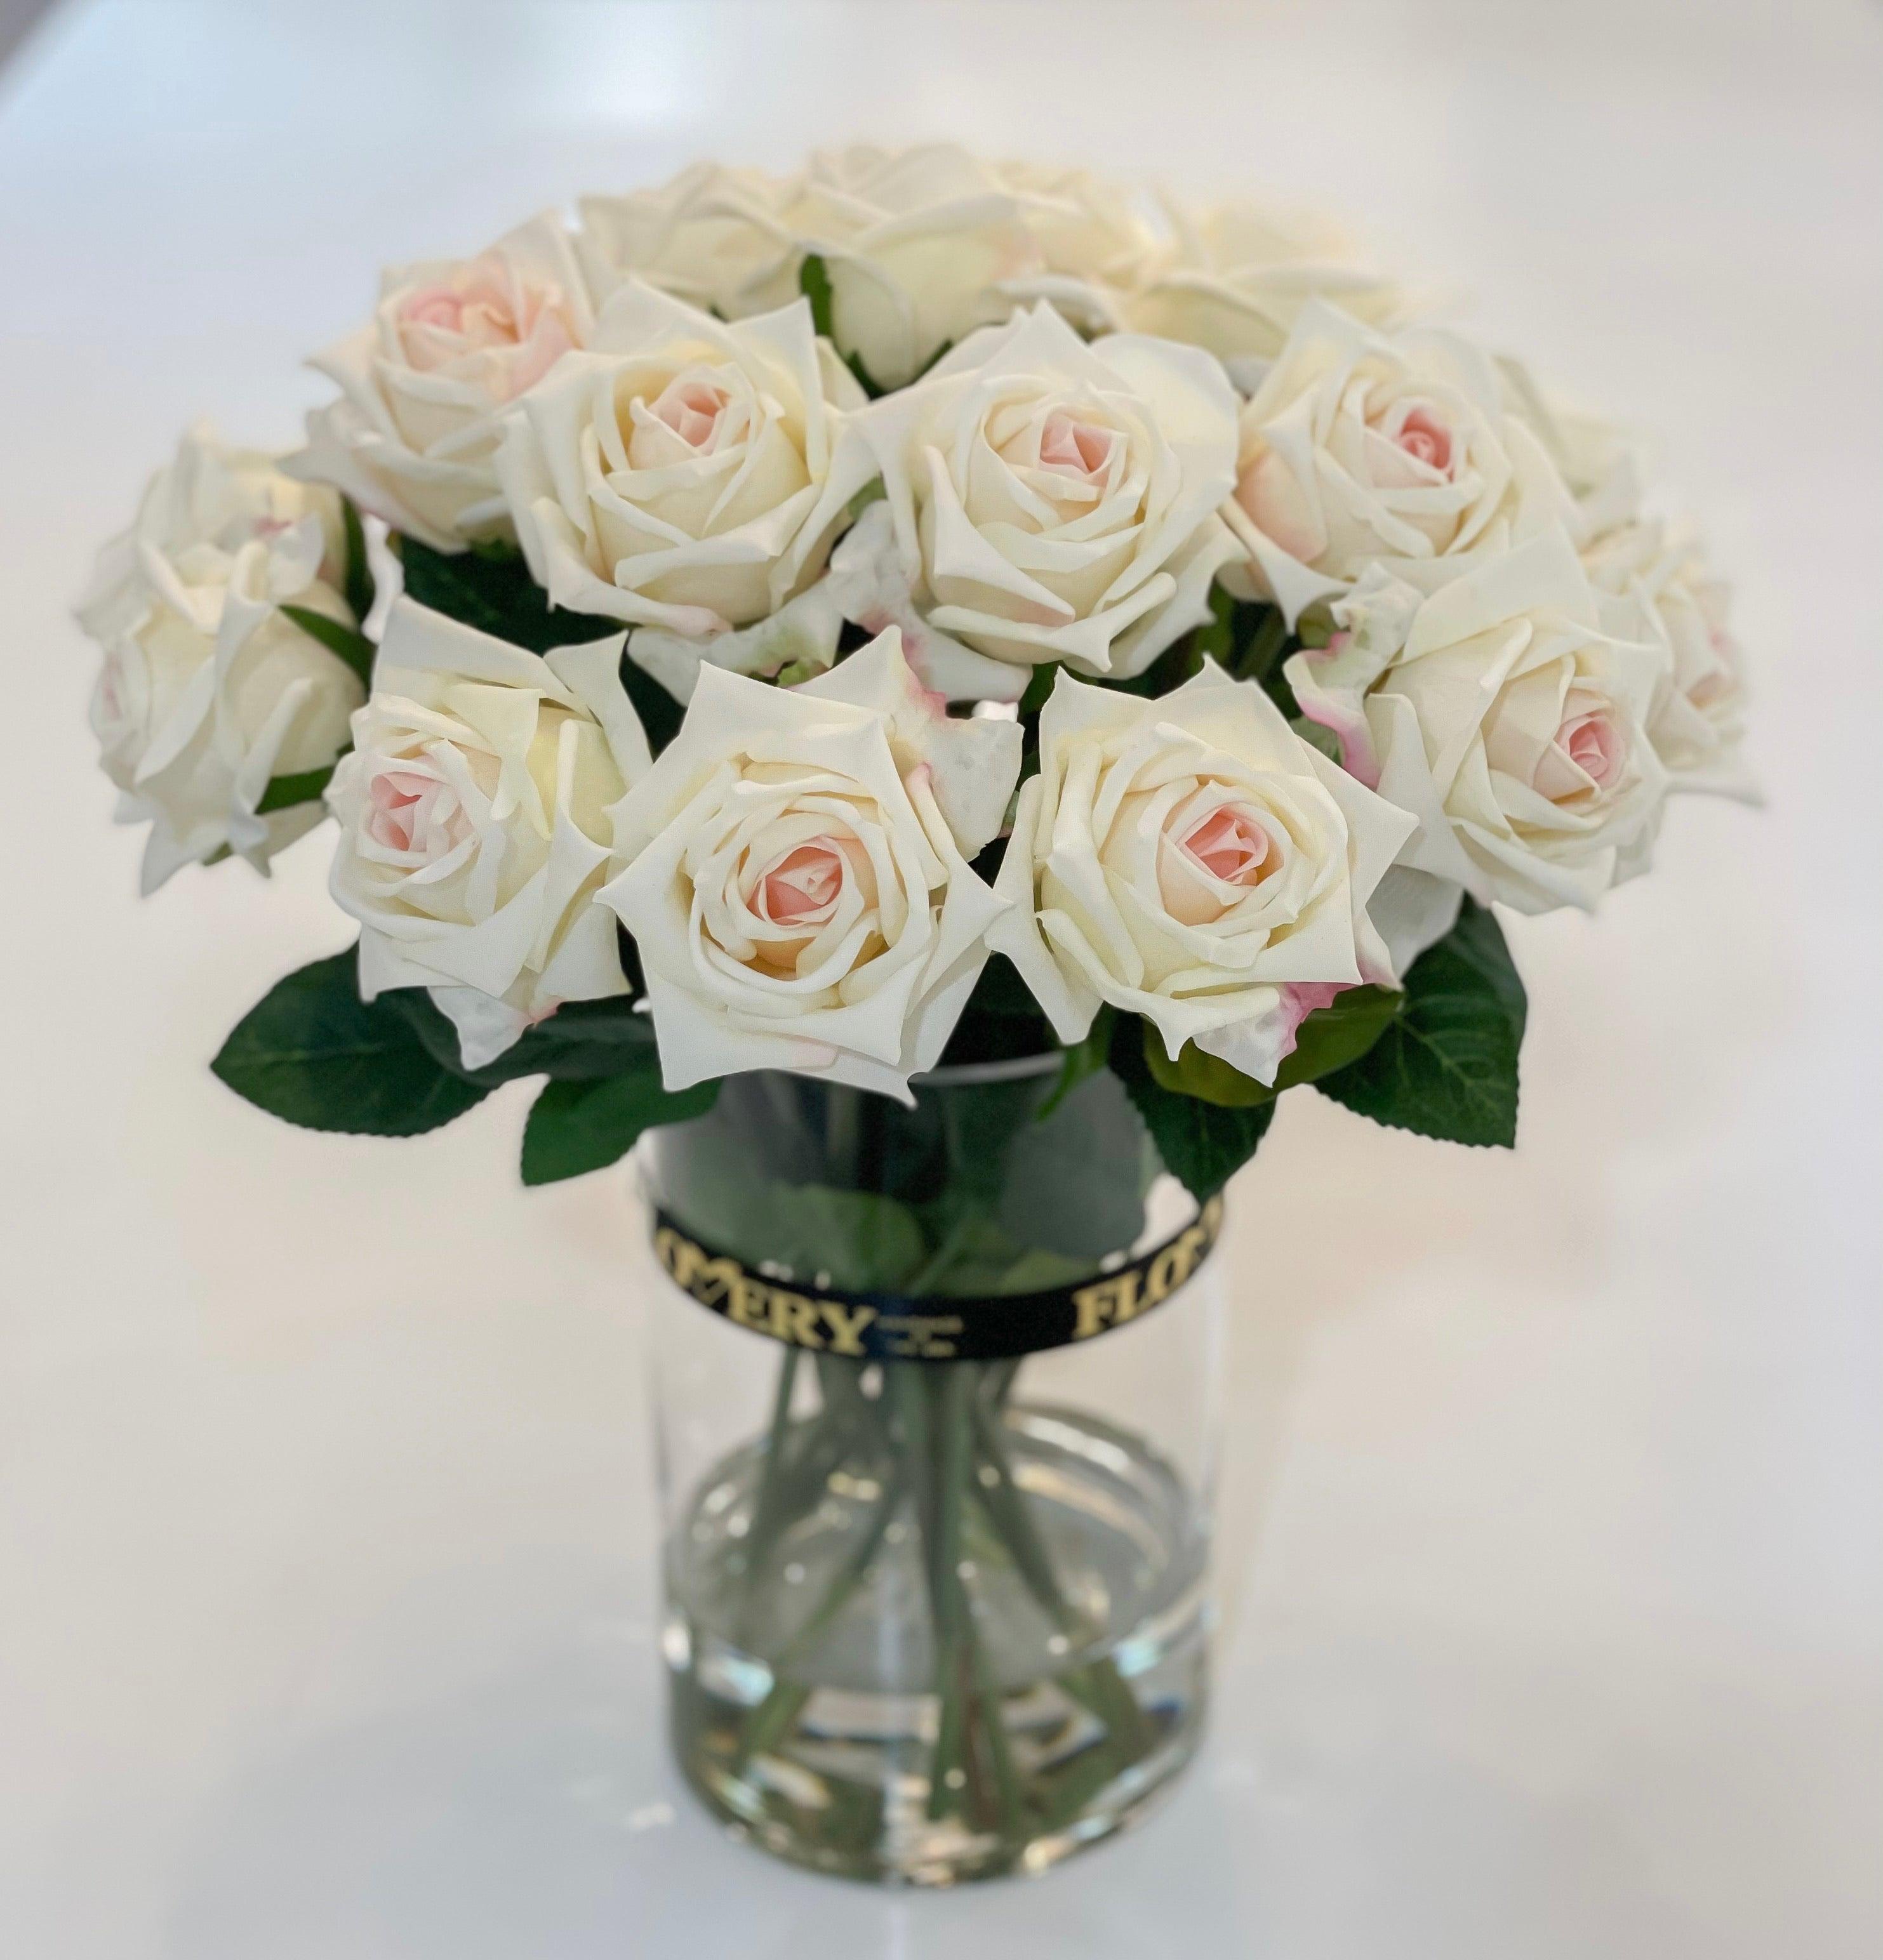 14” Luxury Ivory Rose Real Touch Arrangement - Flovery